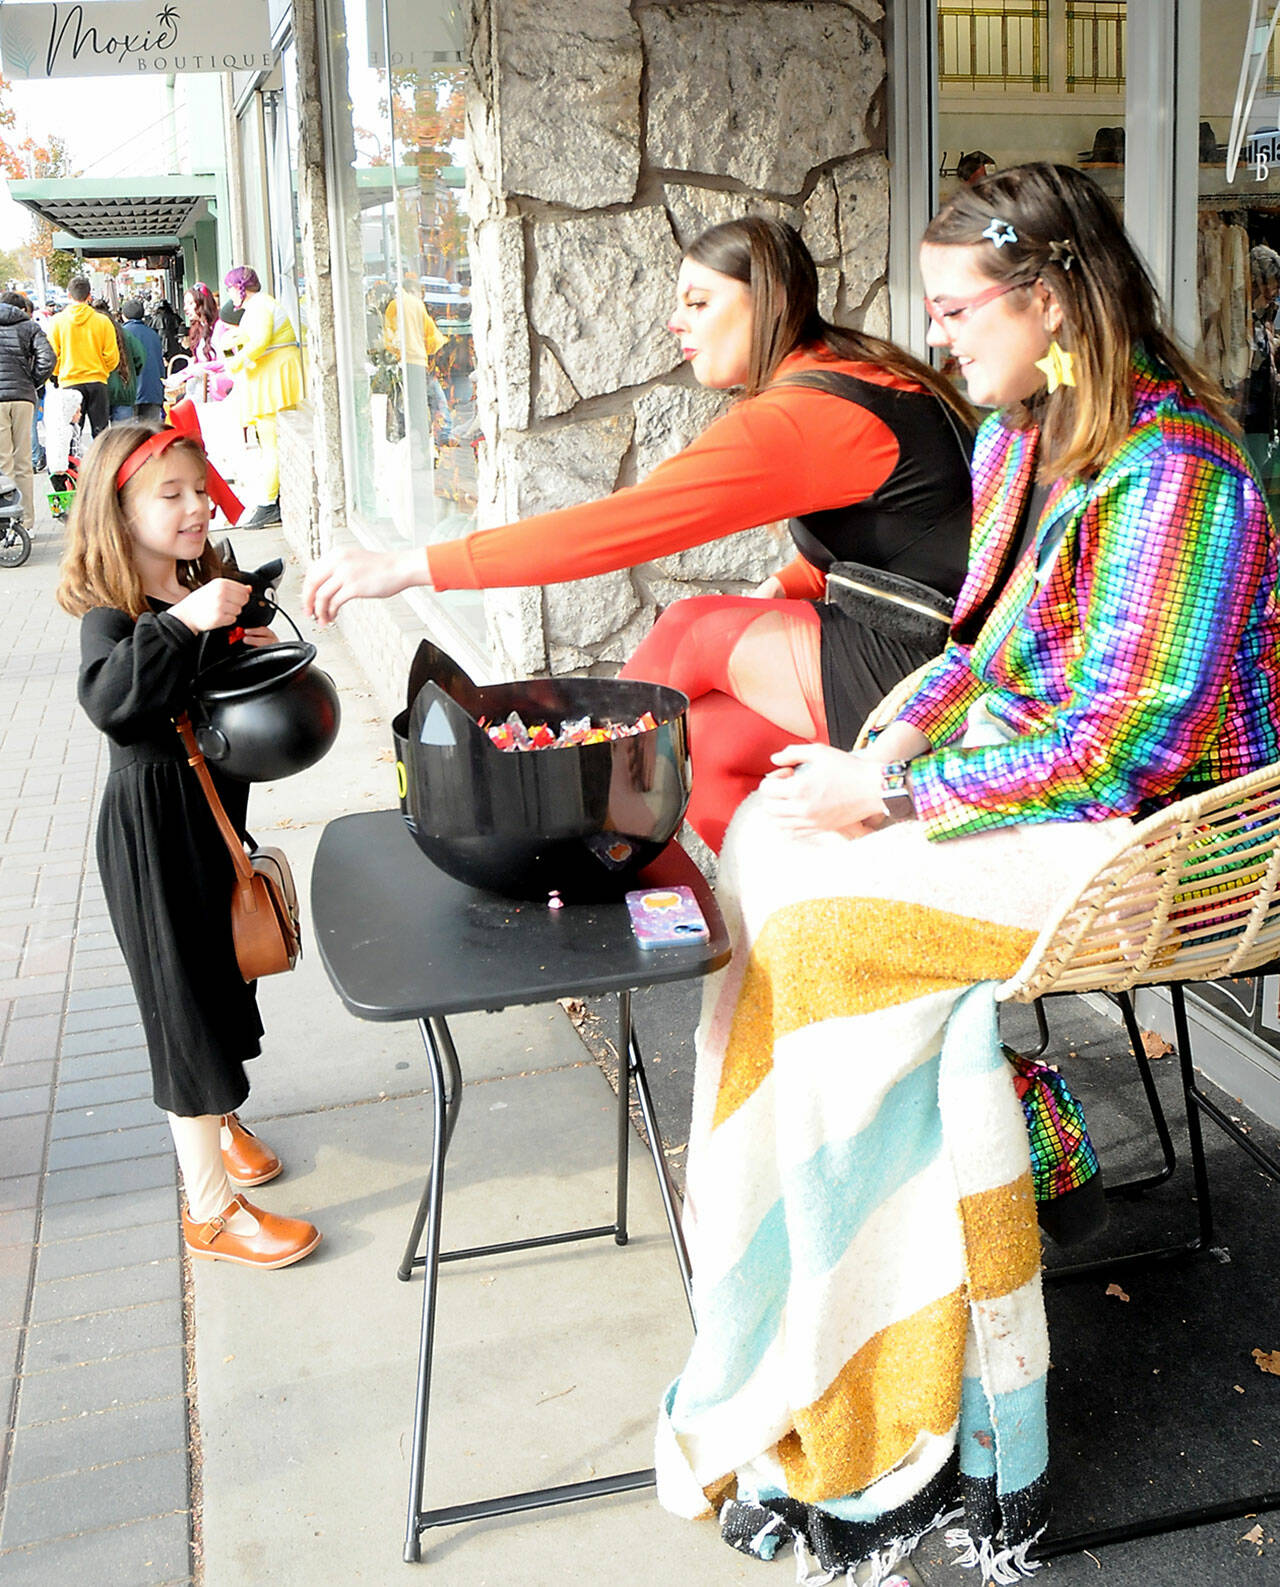 Nimue Garling, 7, of Port Angeles receives a treat from Annie Robertson and Lily Robertson, right, employees of Moxie Boutique, during Tuesday’s Halloween celebration in downtown Port Angeles. (Keith Thorpe/Peninsula Daily News)